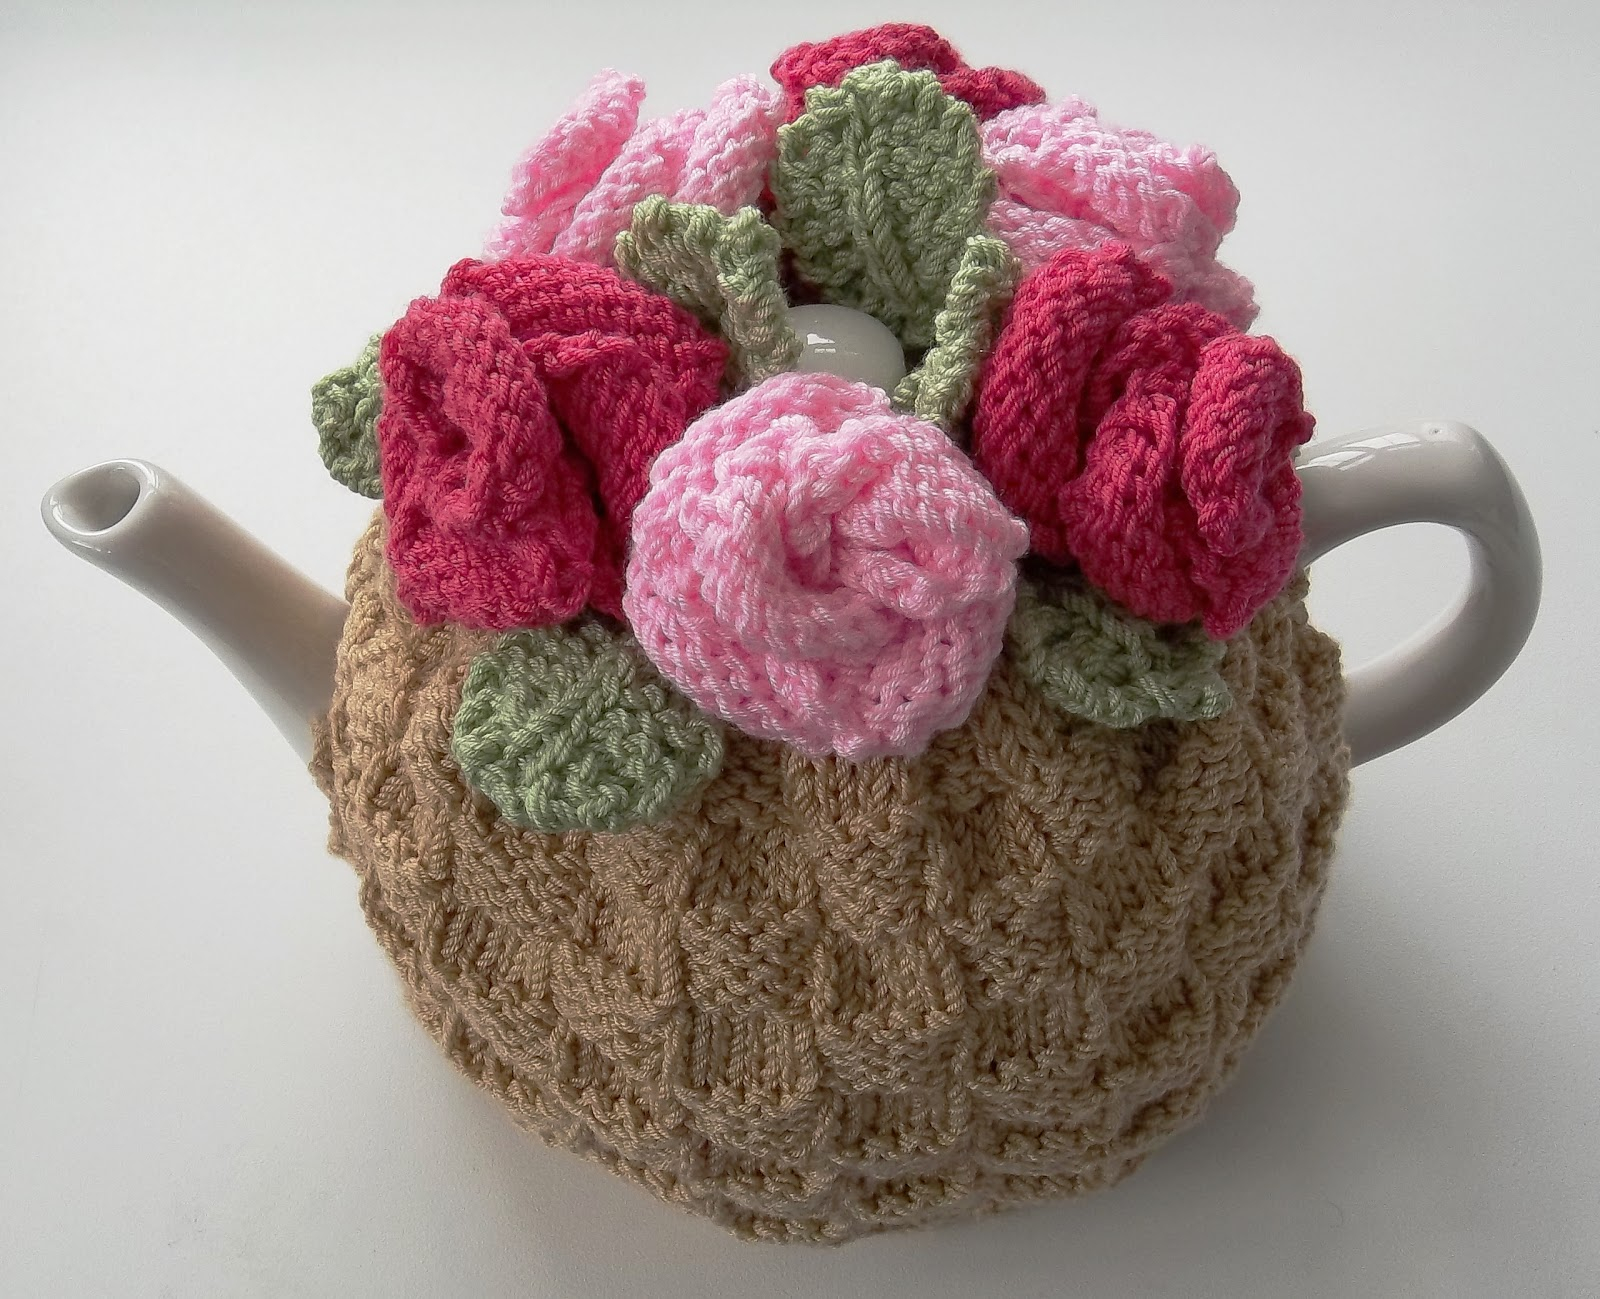 Tea Cozy Patterns To Knit The Tea Rose Tea Cosy Hand Knitting Pattern